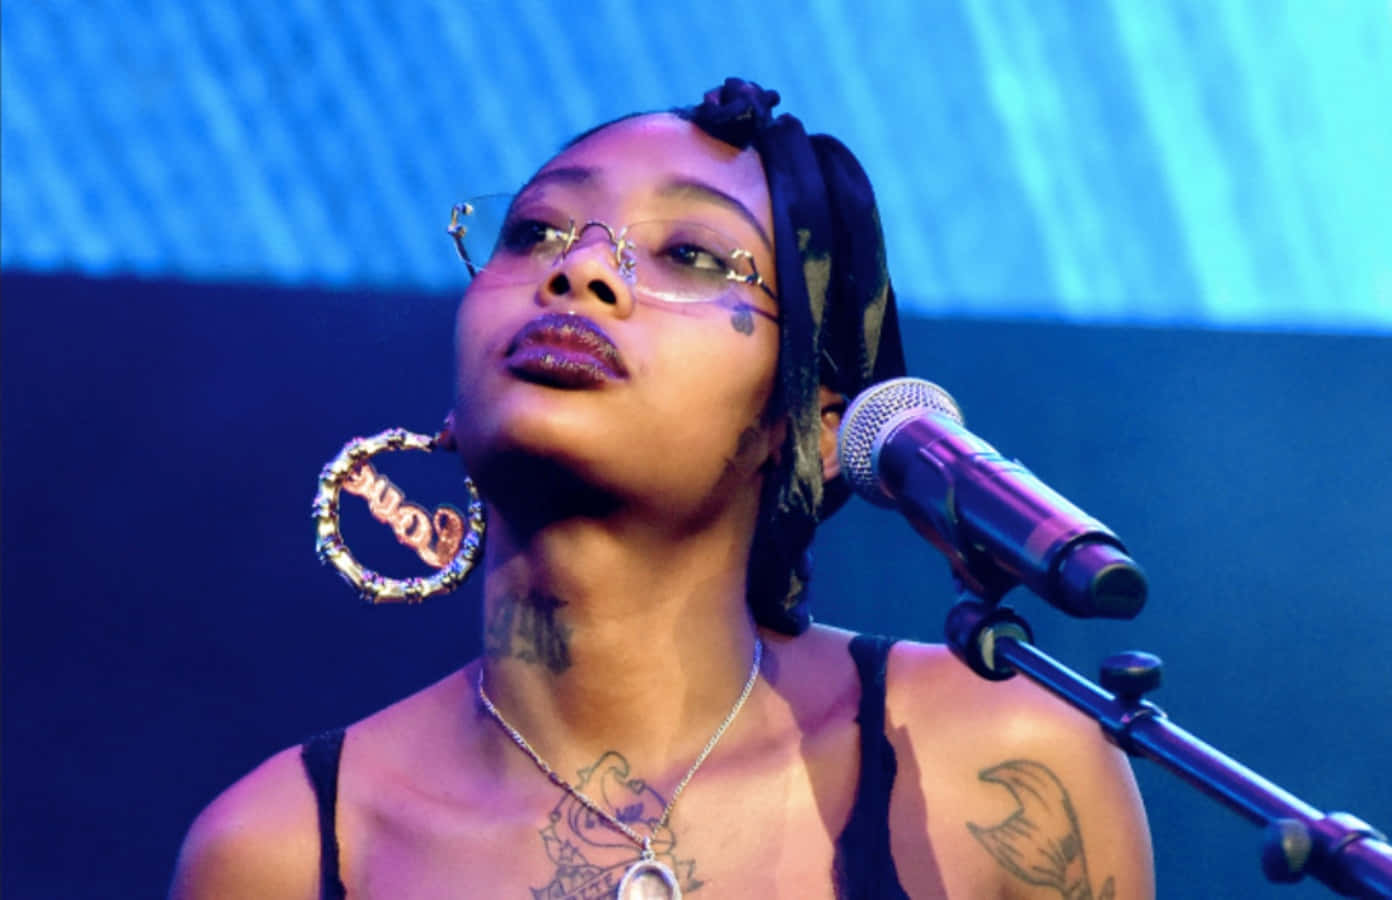 A Woman With Tattoos And Glasses Singing Into A Microphone